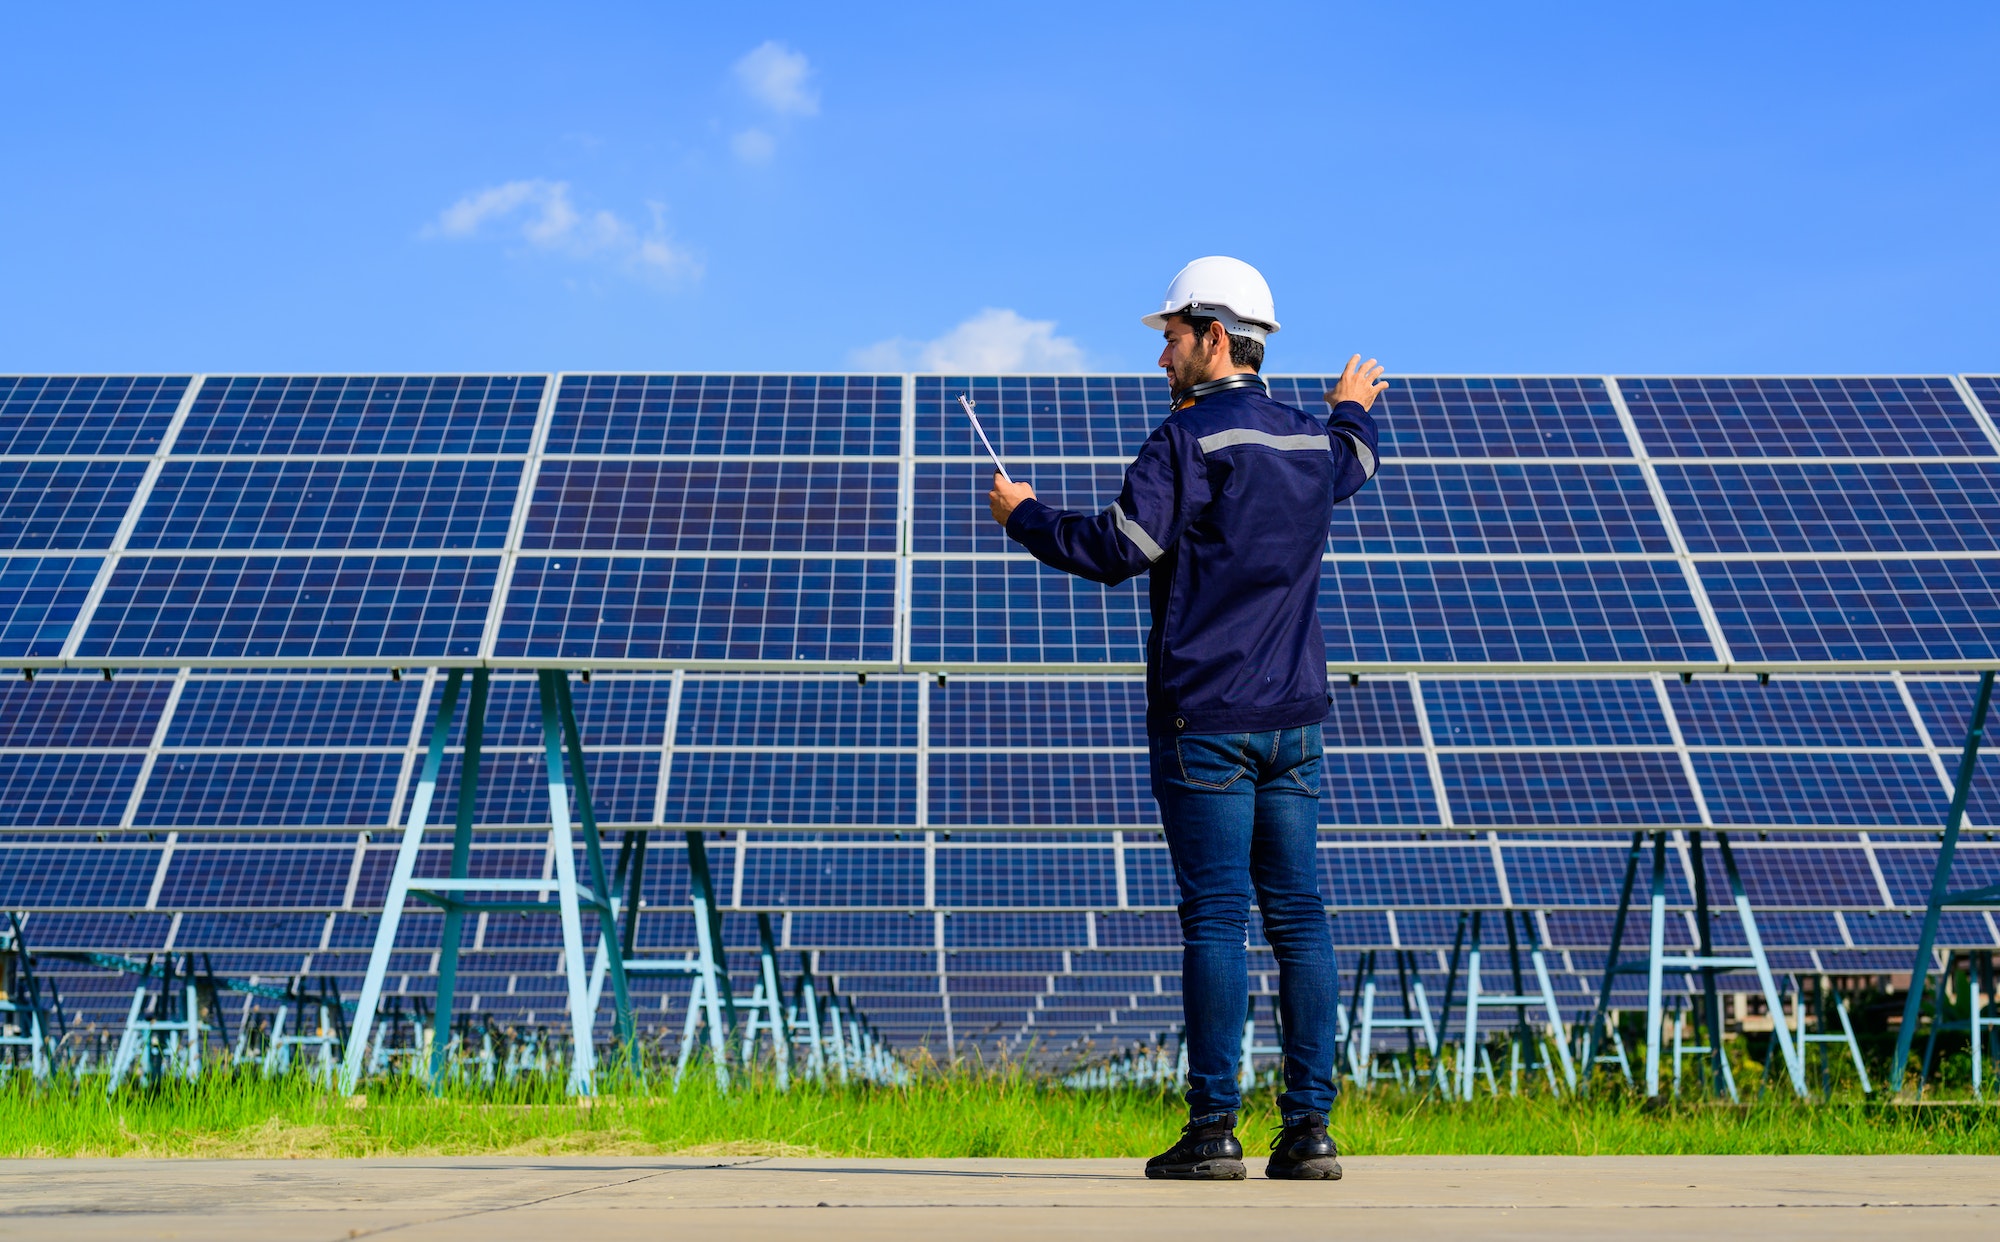 Engineer worker portrait with solar panel at solar farm